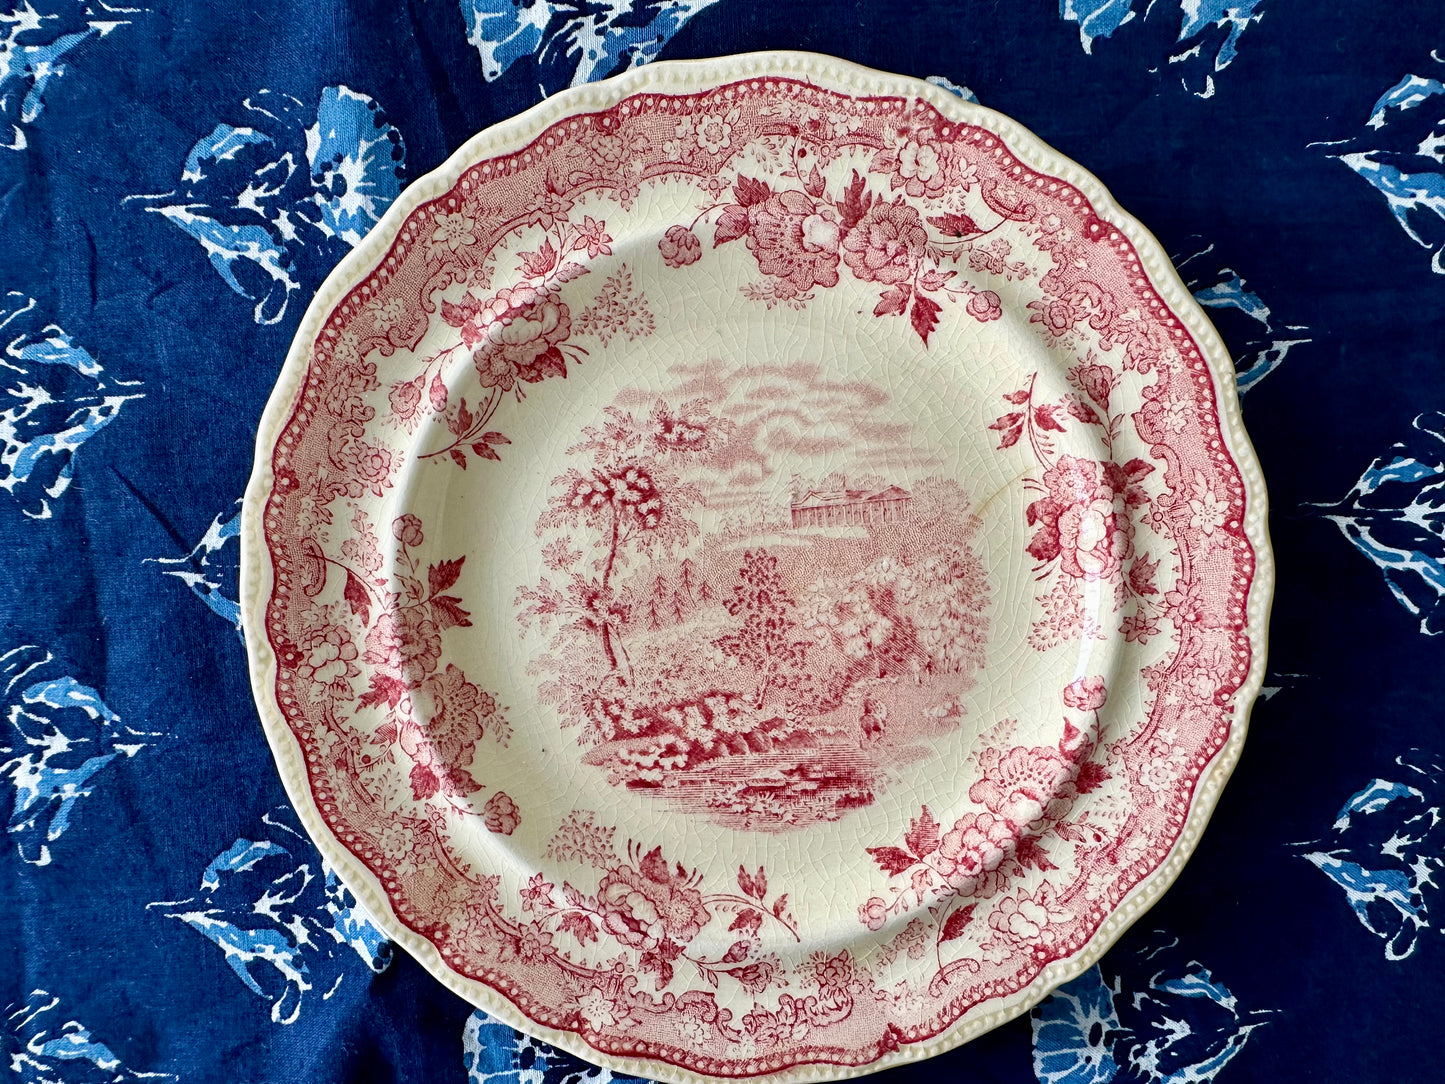 Set of 8 antique red and white transferware bread plates made by William Ridgway in 1830's - DharBazaar